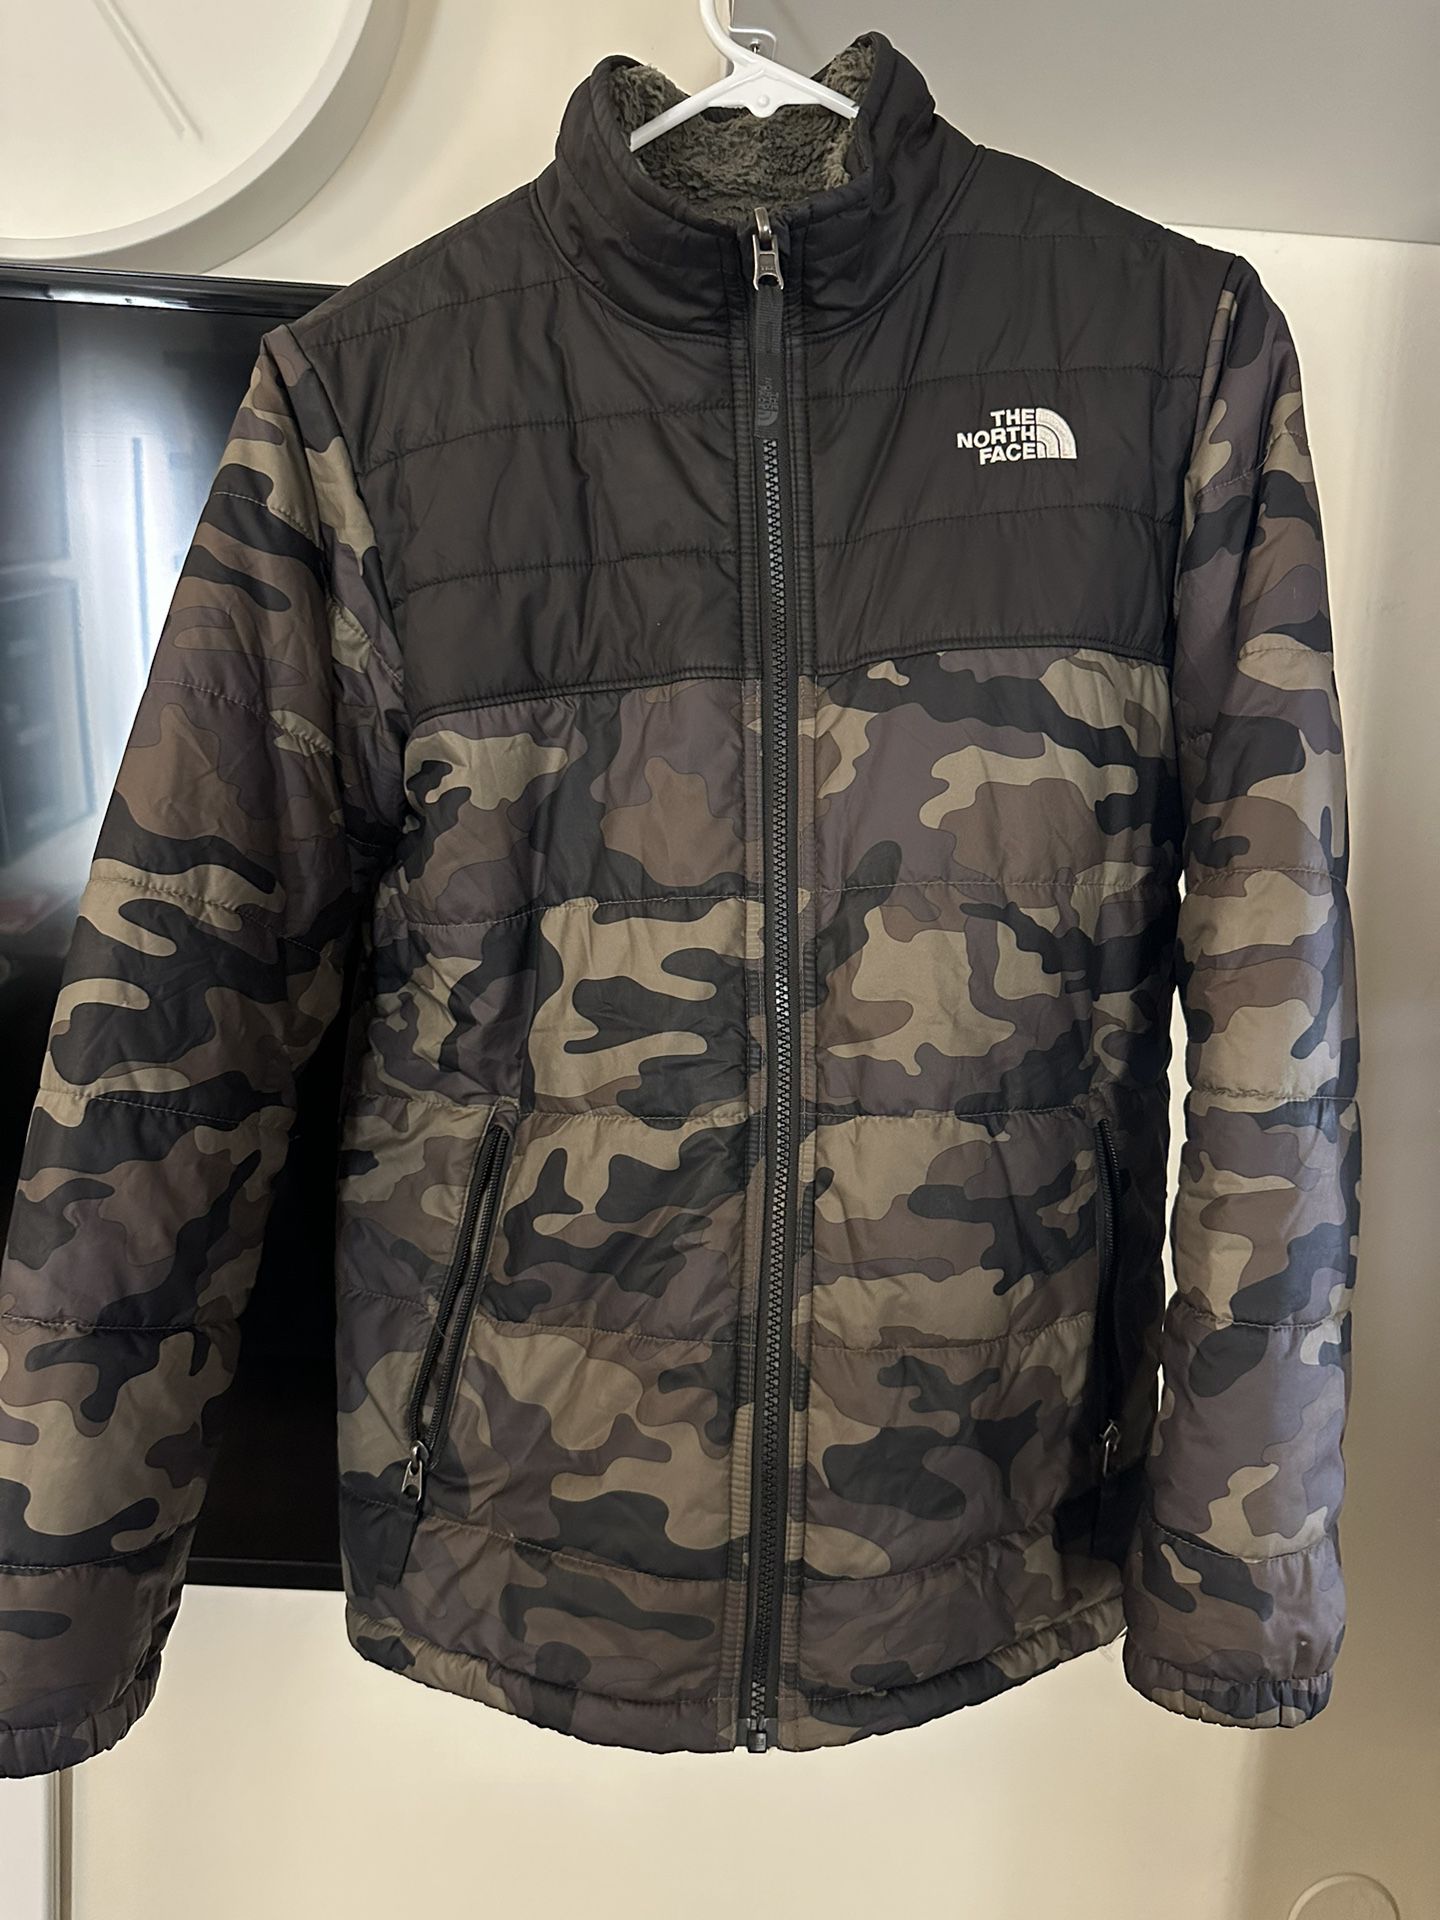 The North Face Camo Puffer Jacket Sz Large Boys 16-17